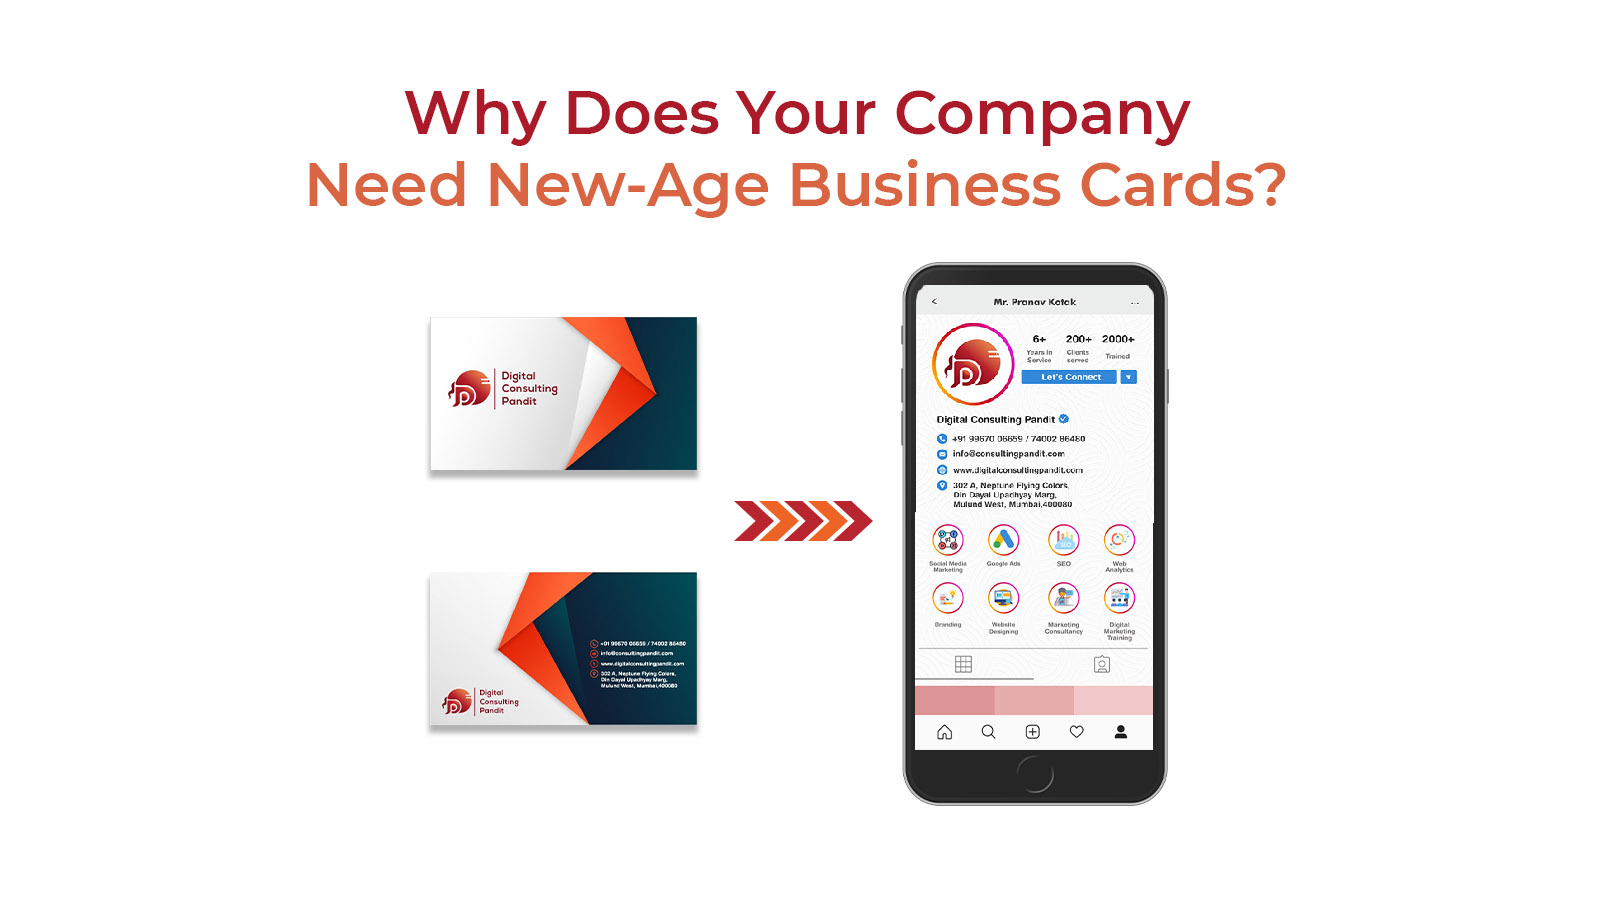 Why Does Your Company Need New-Age Business Cards?